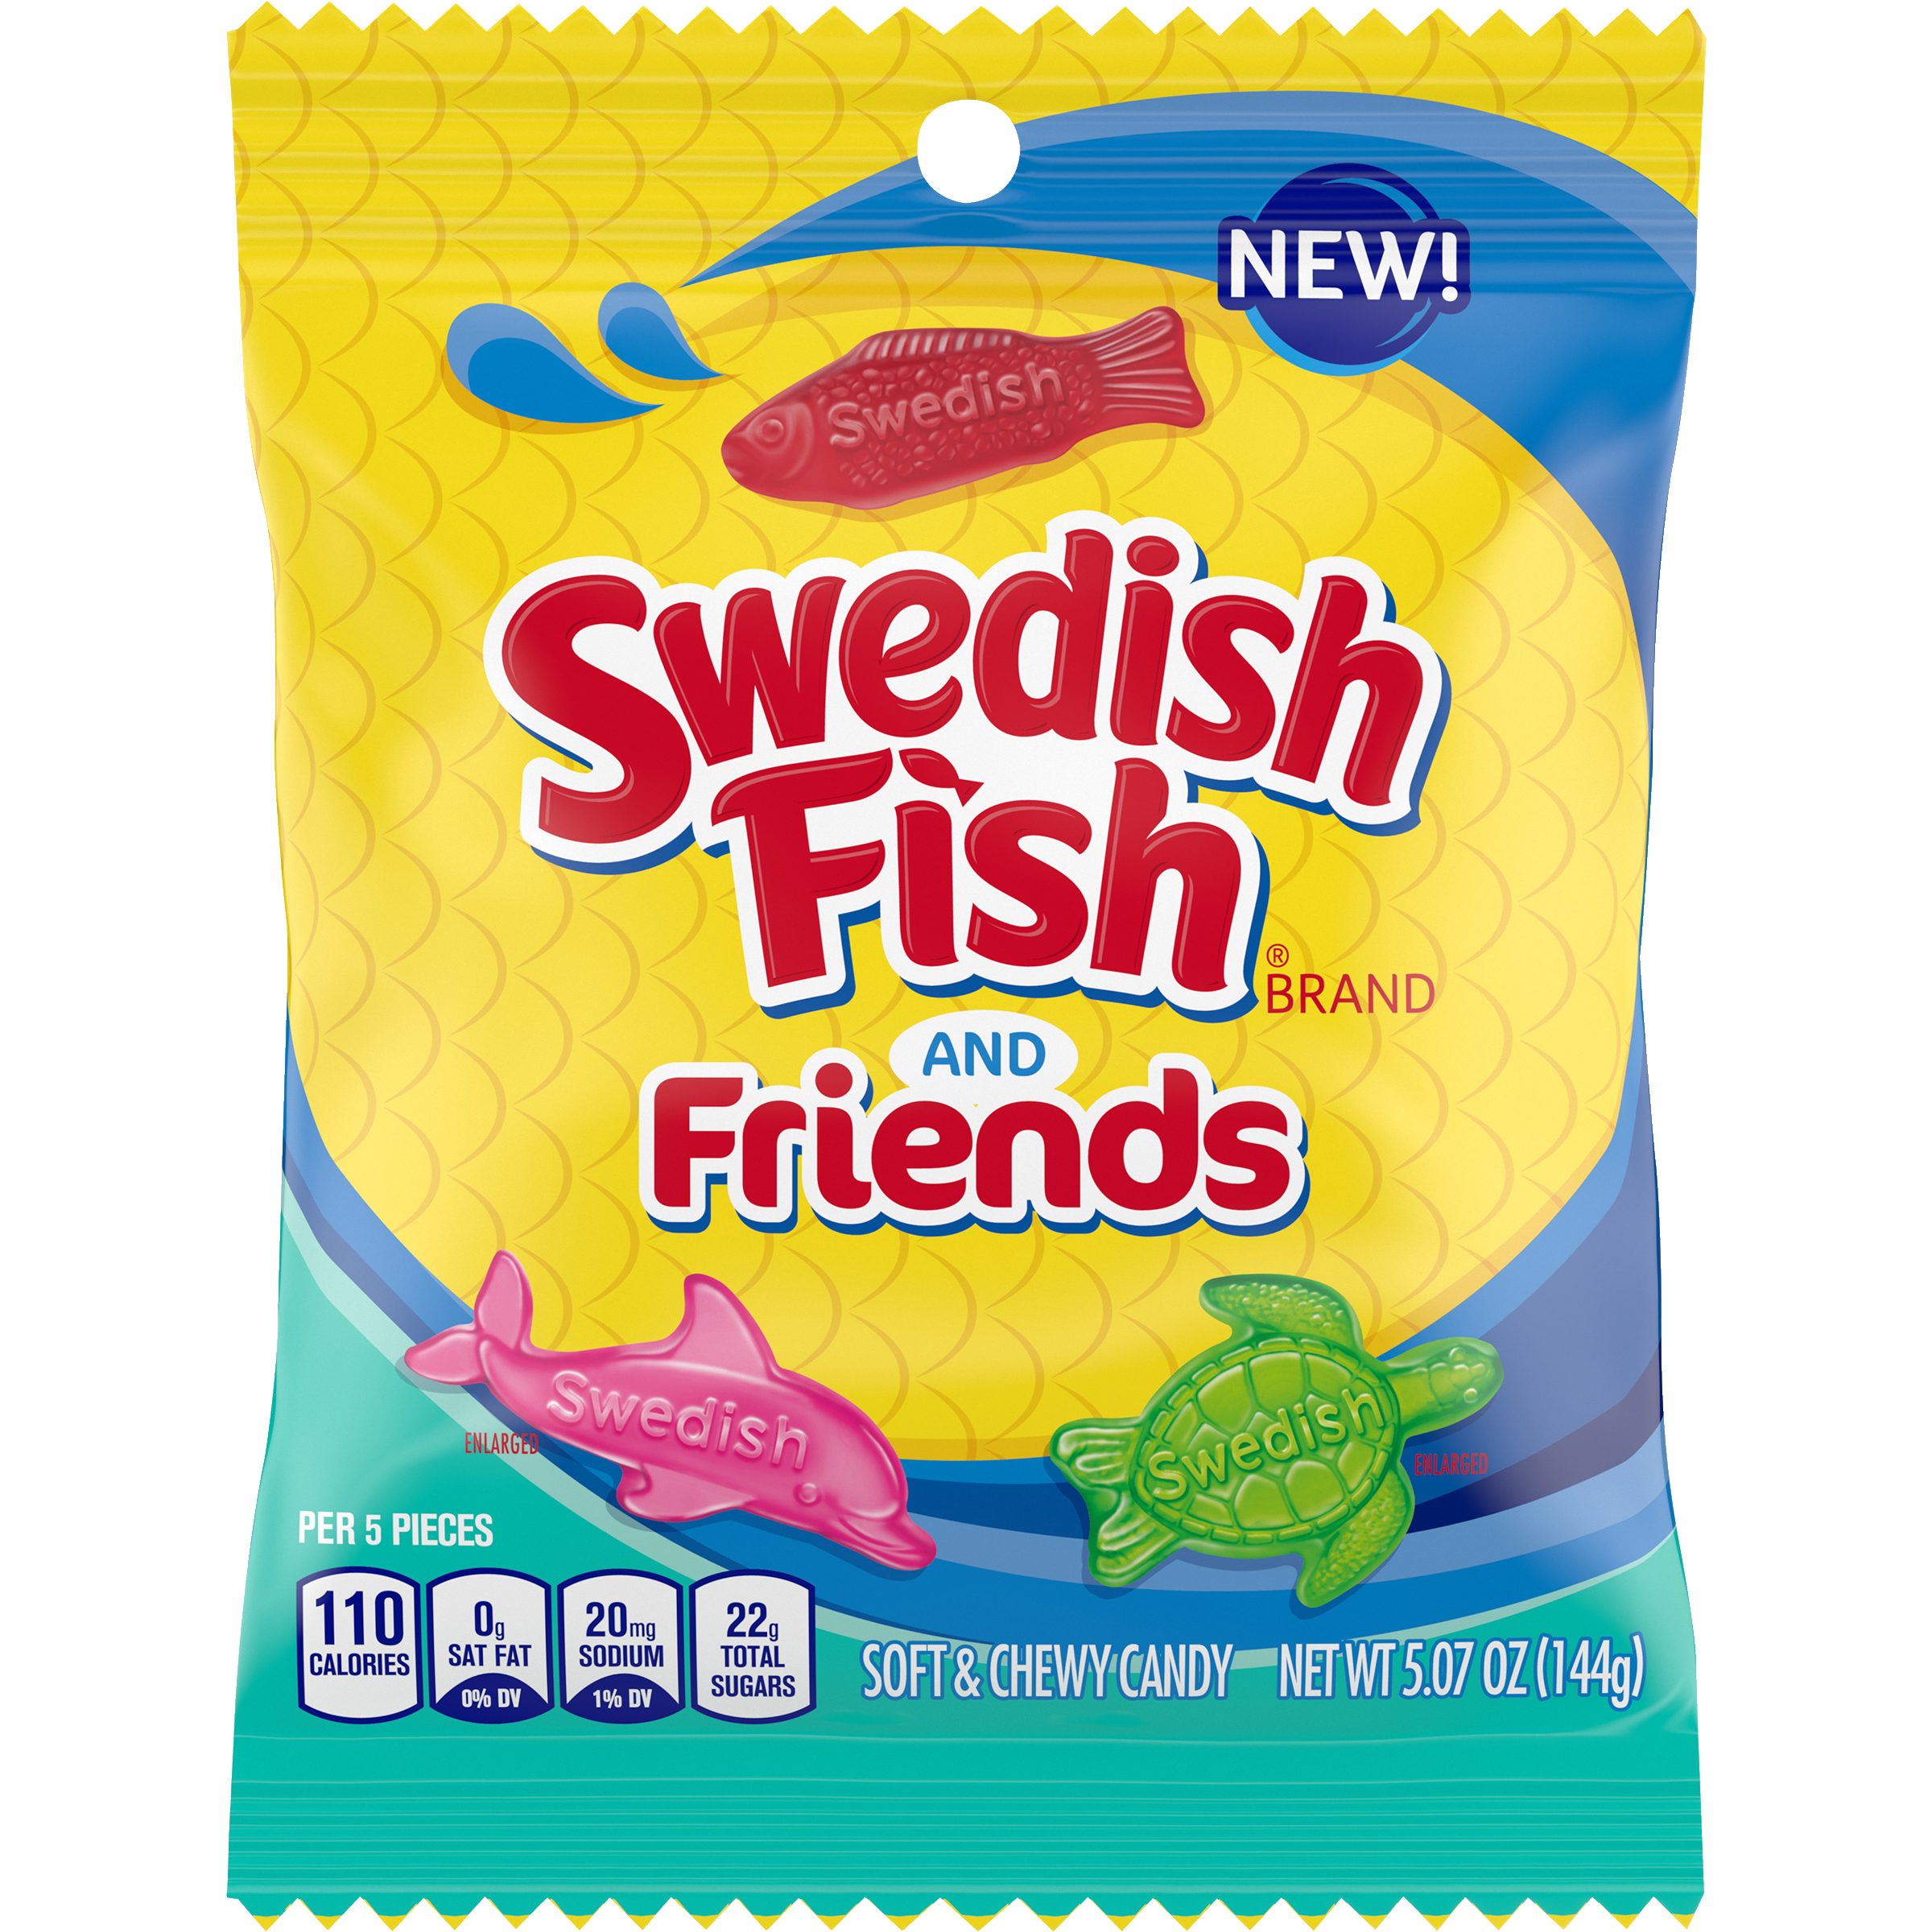 SWEDISH FISH and Friends Soft & Chewy Candy, 5.07 oz-1